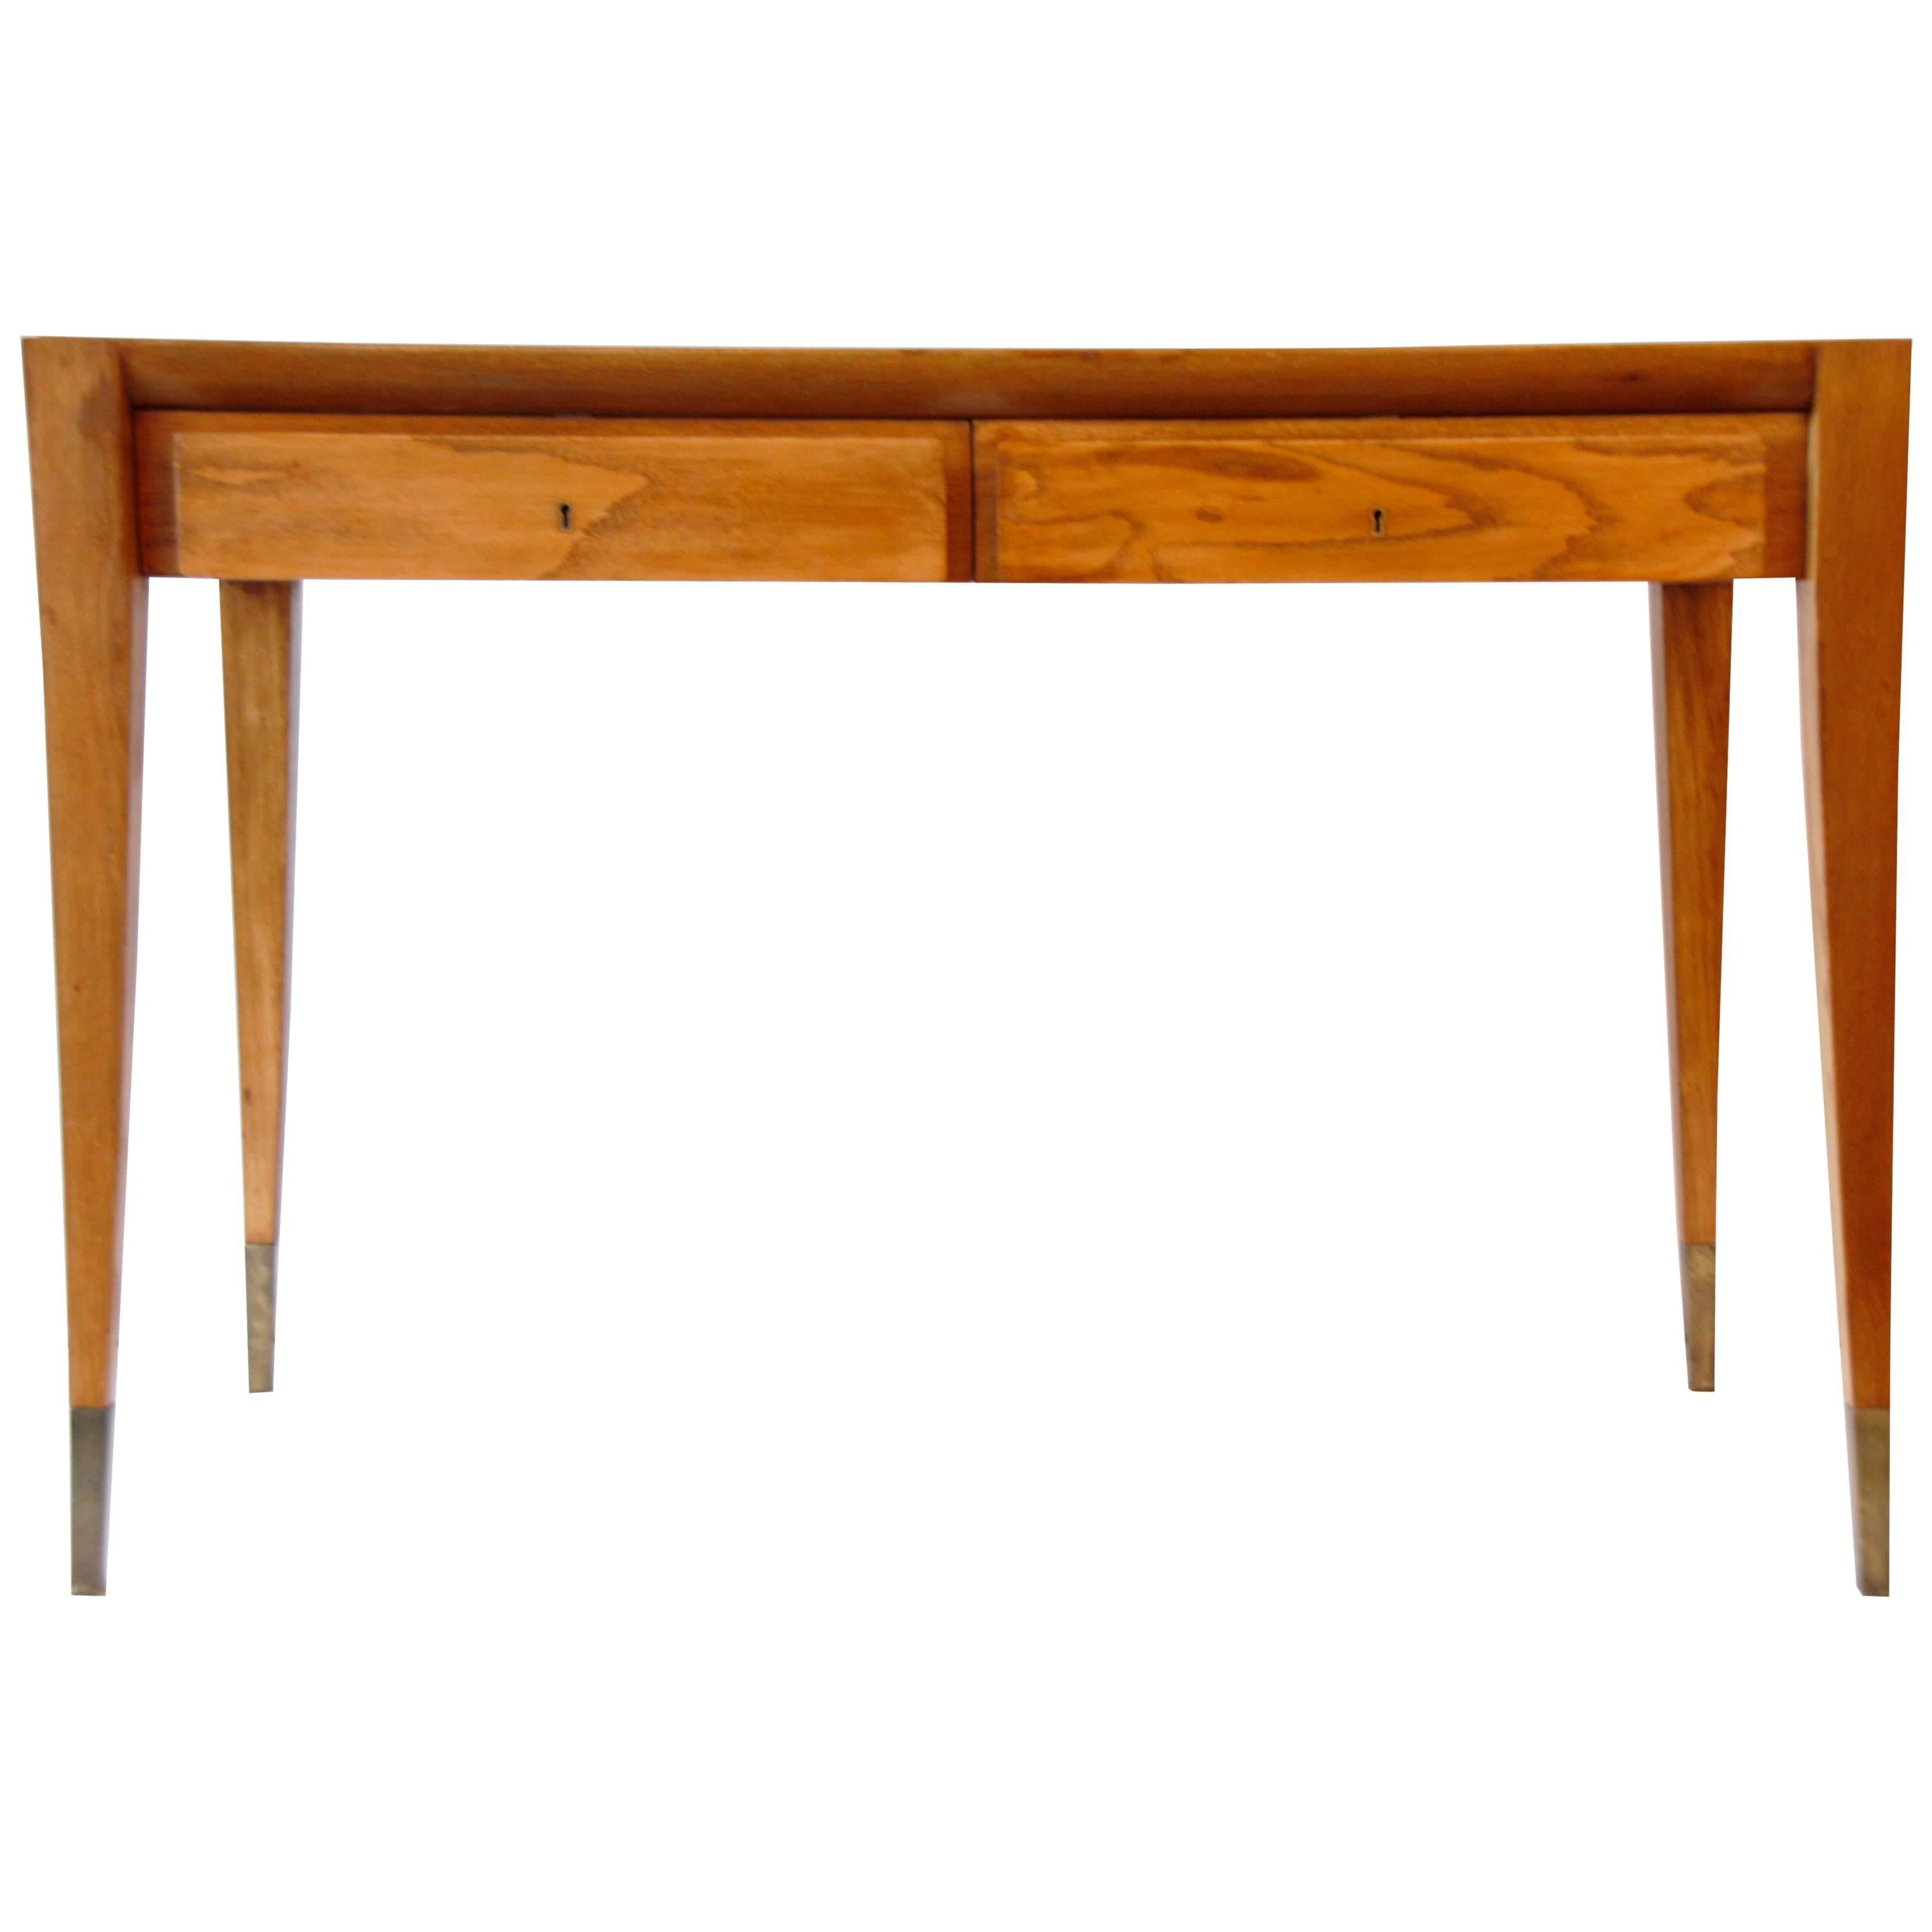 Italian Vintage Clear Oak Desk with Drawers by Gio Ponti, circa 1950 For Sale